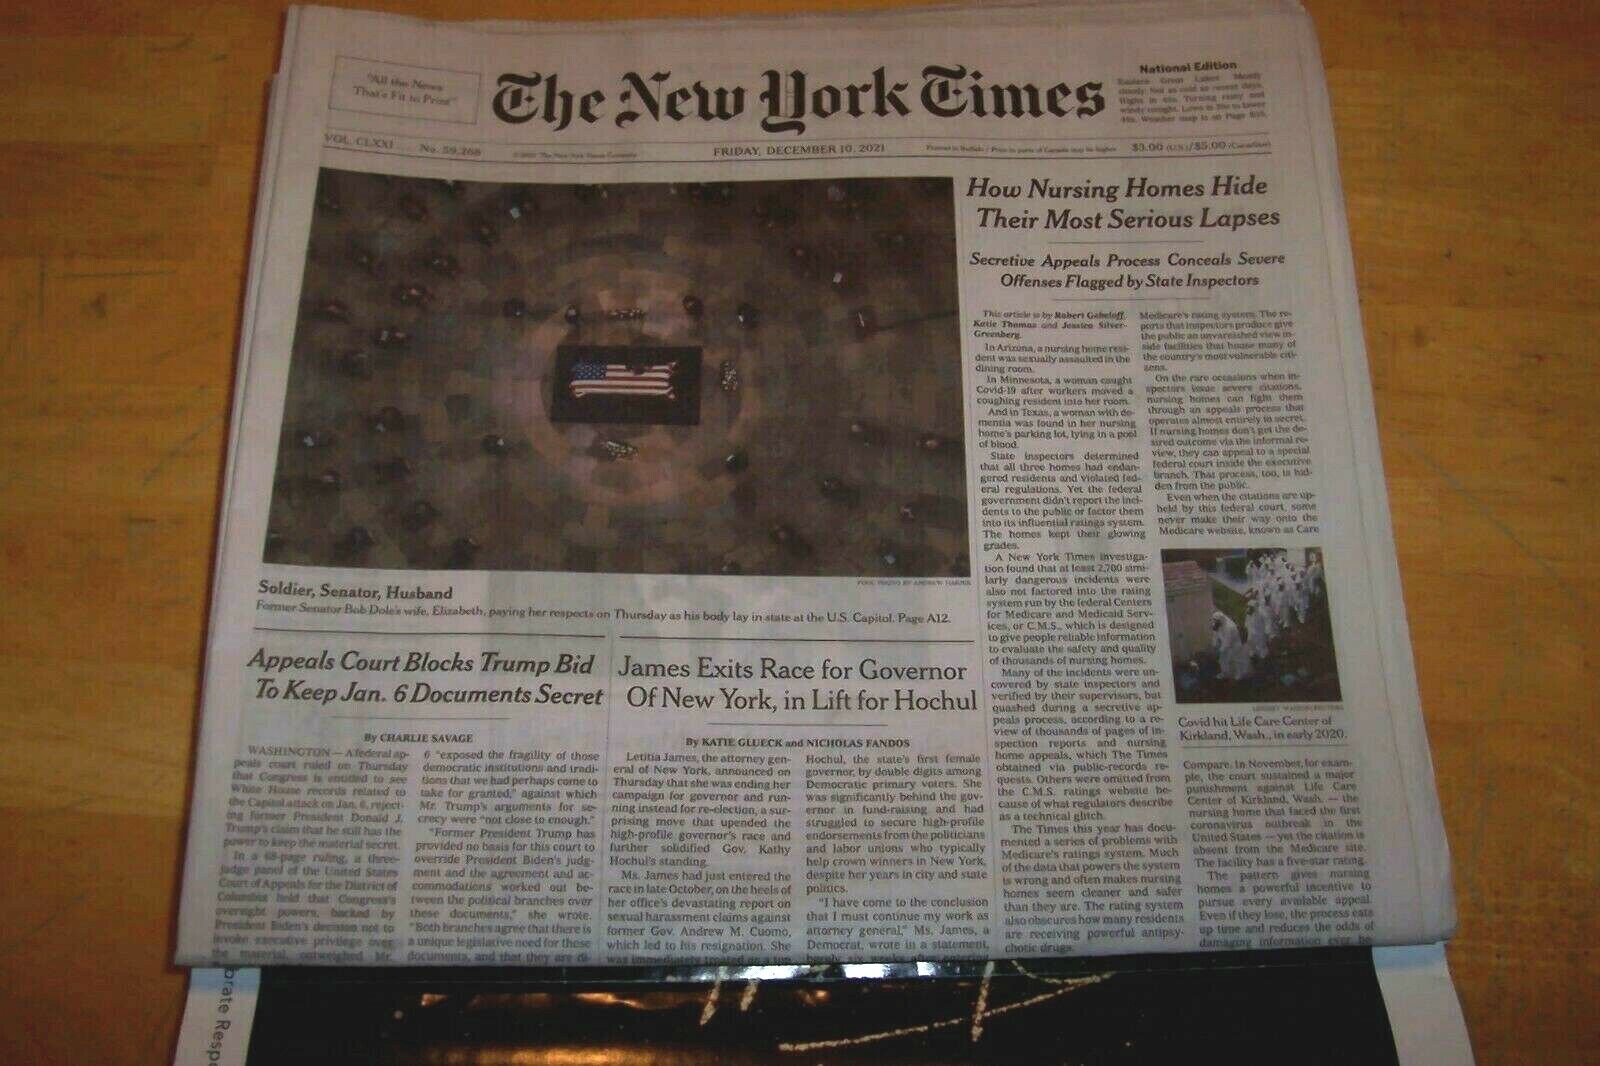 THE NEW YORK TIMES FRIDAY DECEMBER 10, 2021 (BOB DOLE passes)